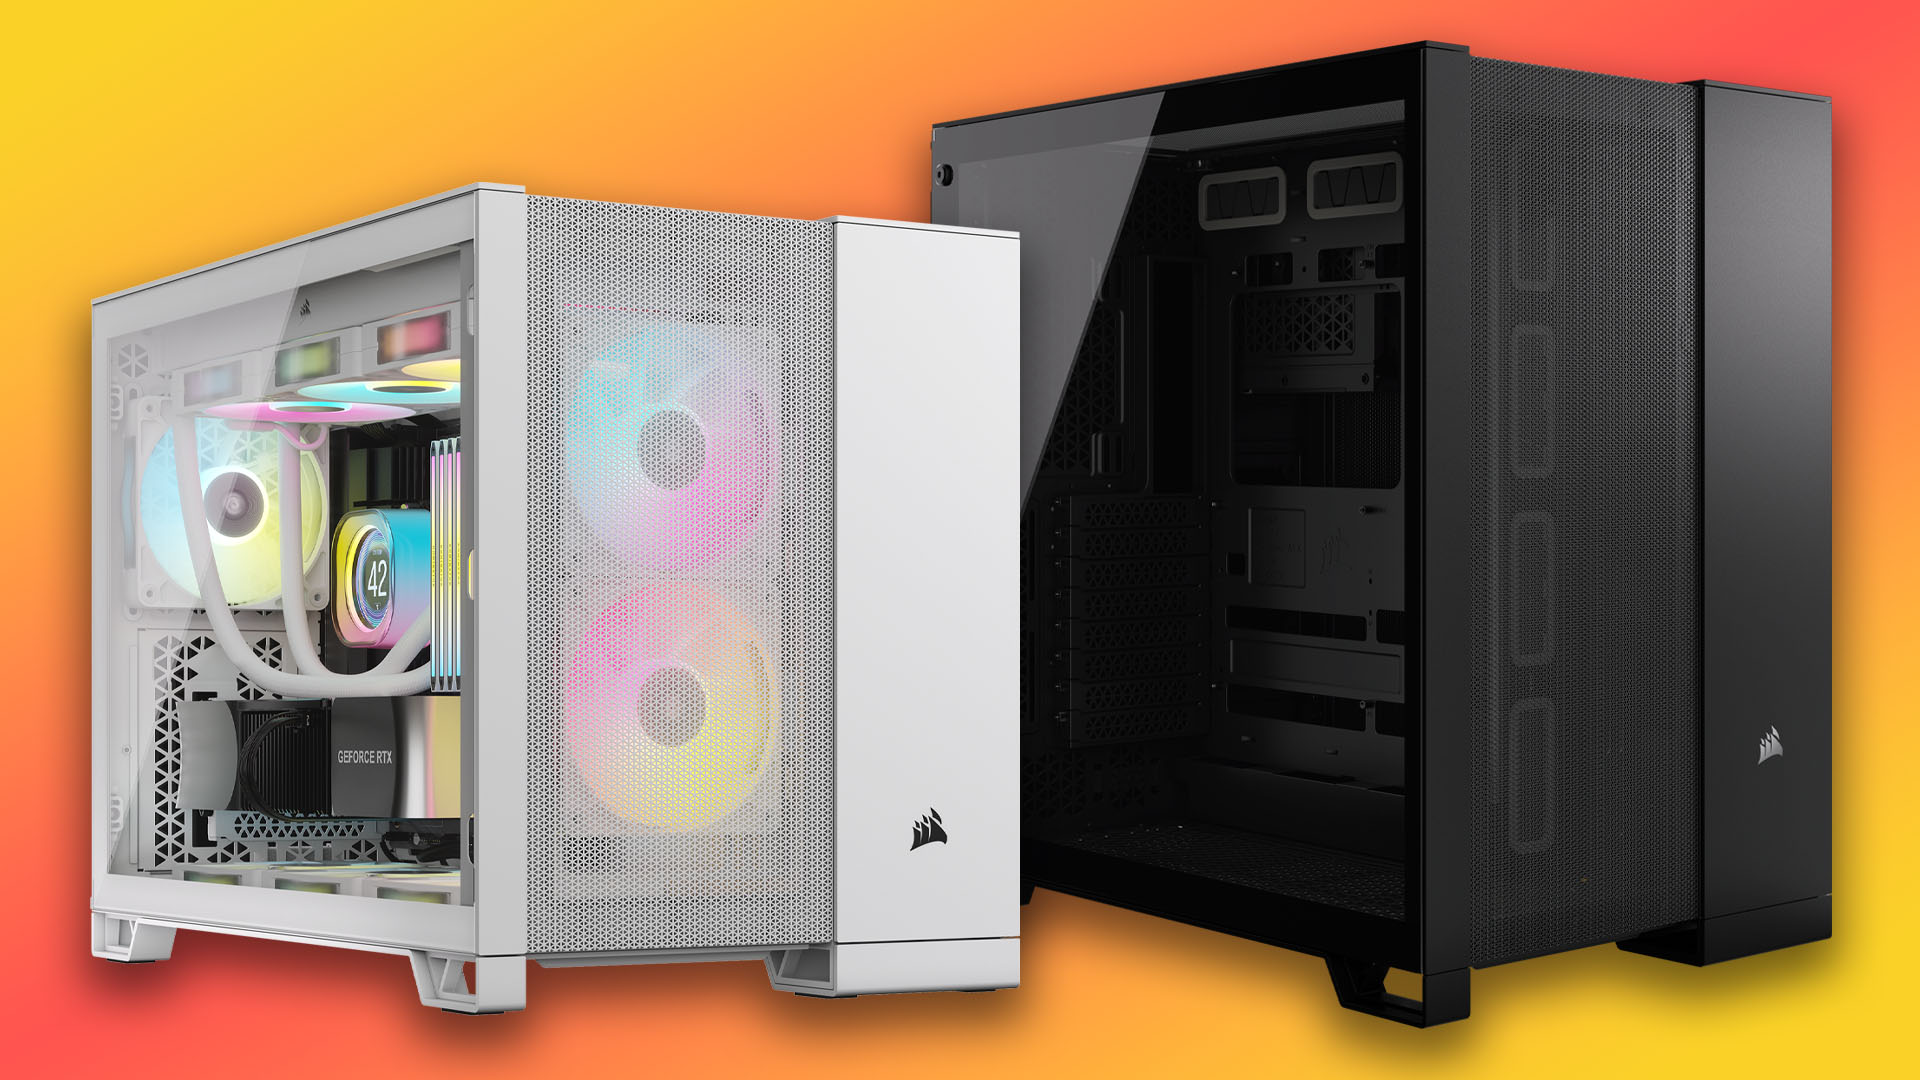 Corsair's new PC cases are a cable manager's dream